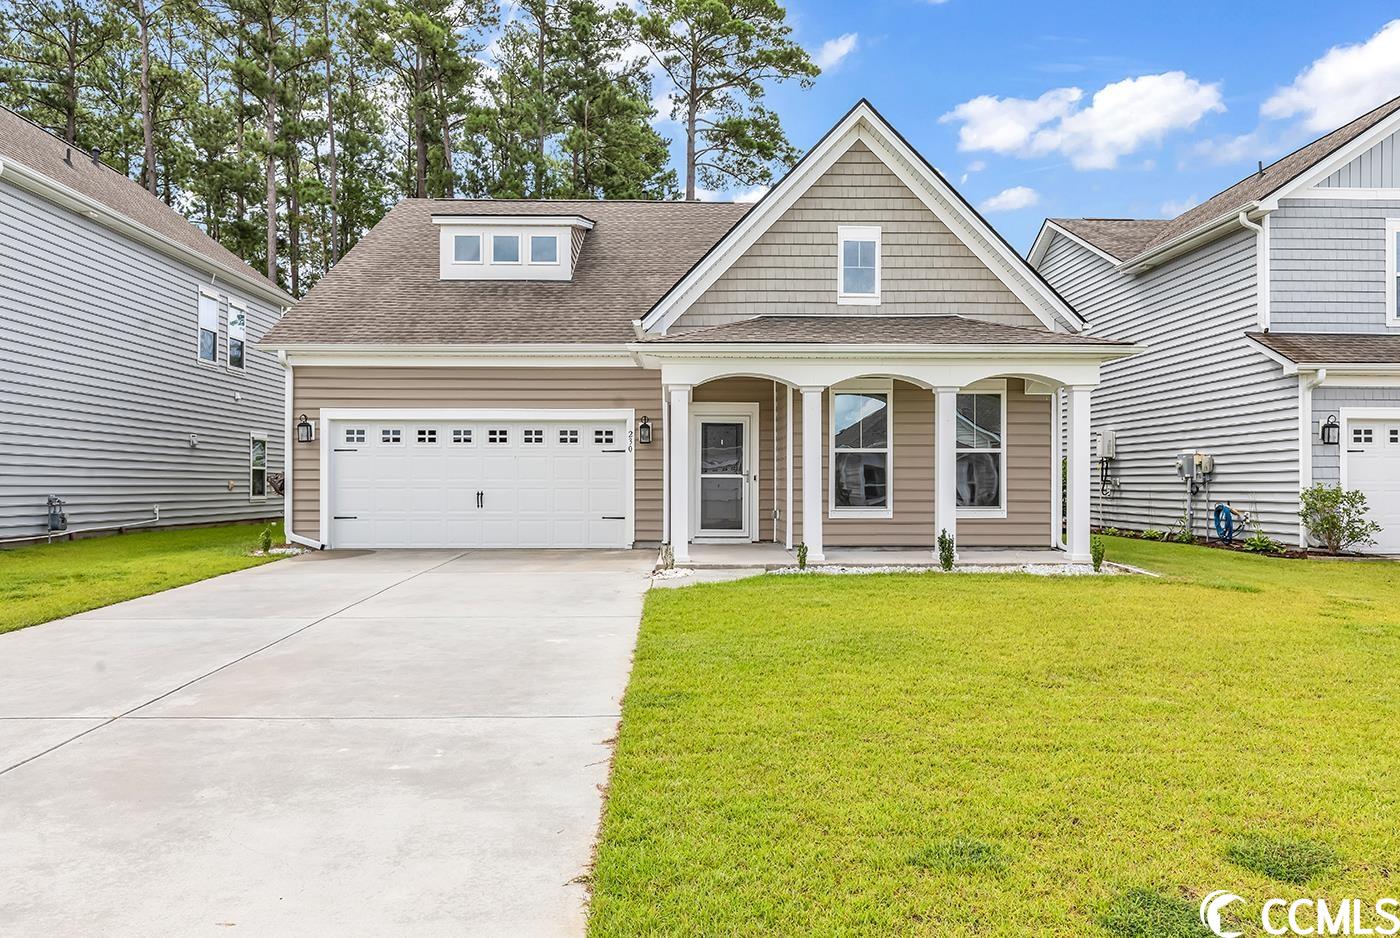 JUST LISTED and OPEN HOUSE! 230 Harbison Circle in Myrtle Beach